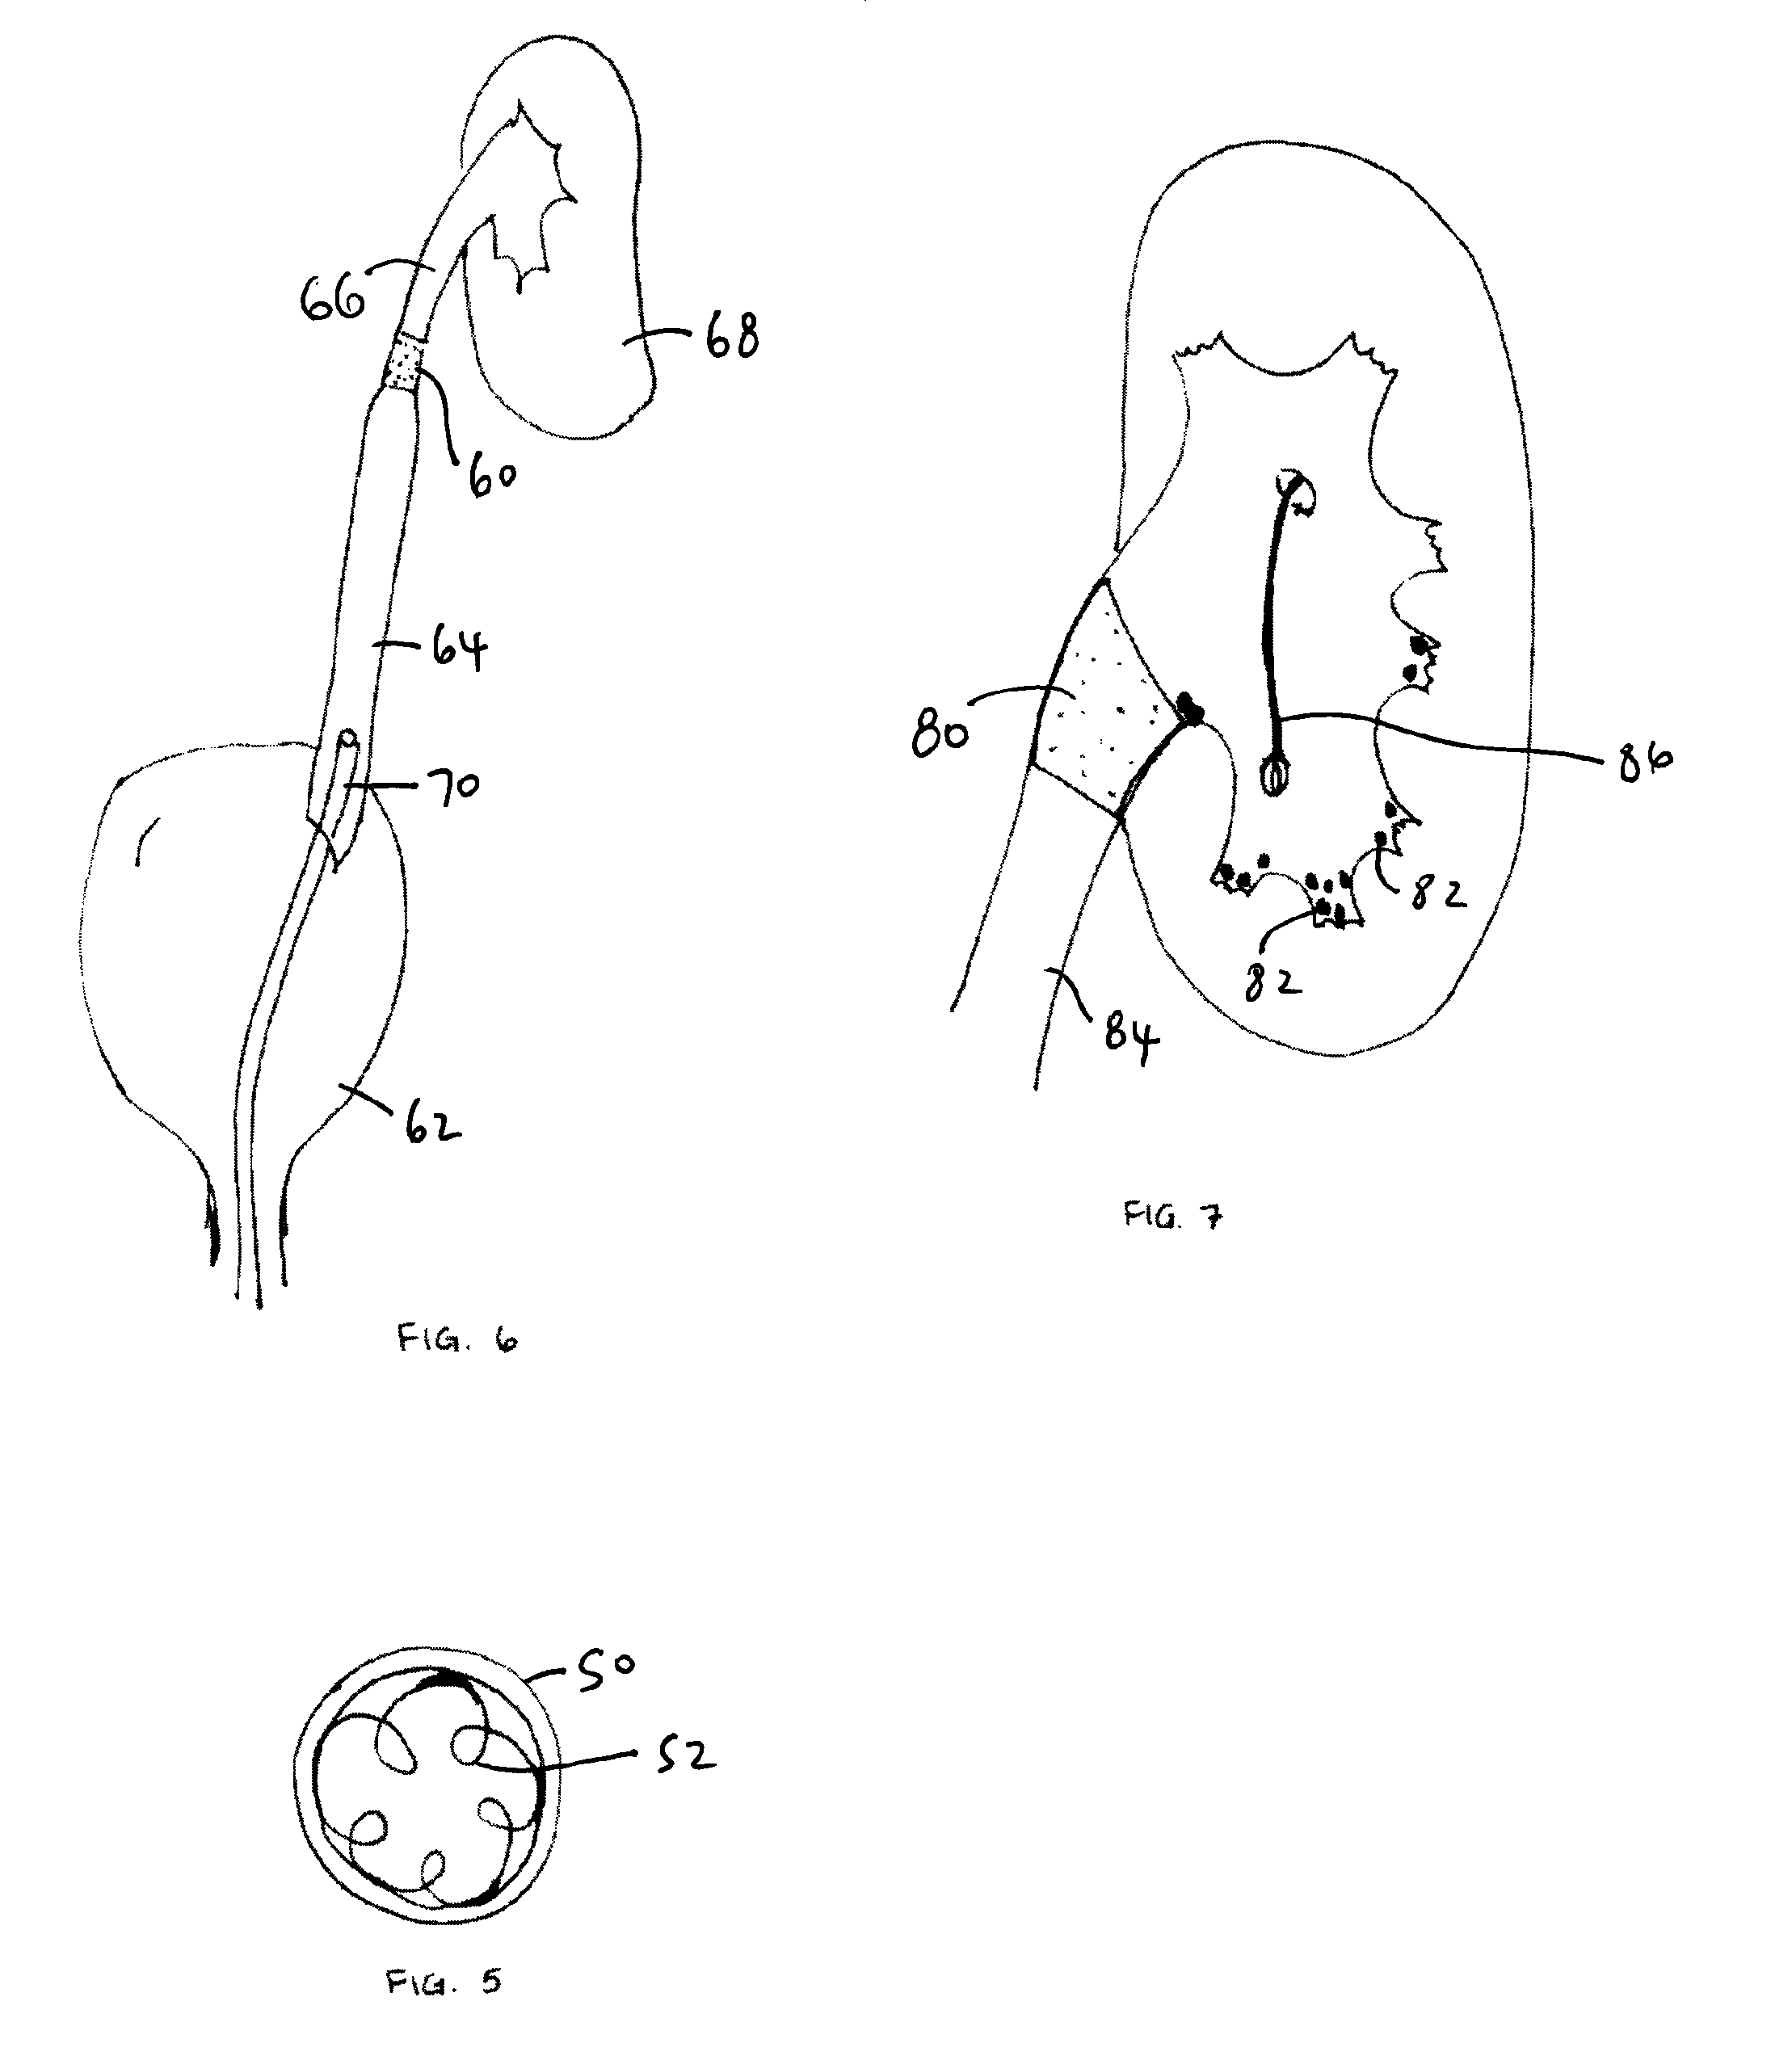 Methods and apparatus for temporarily occluding body openings